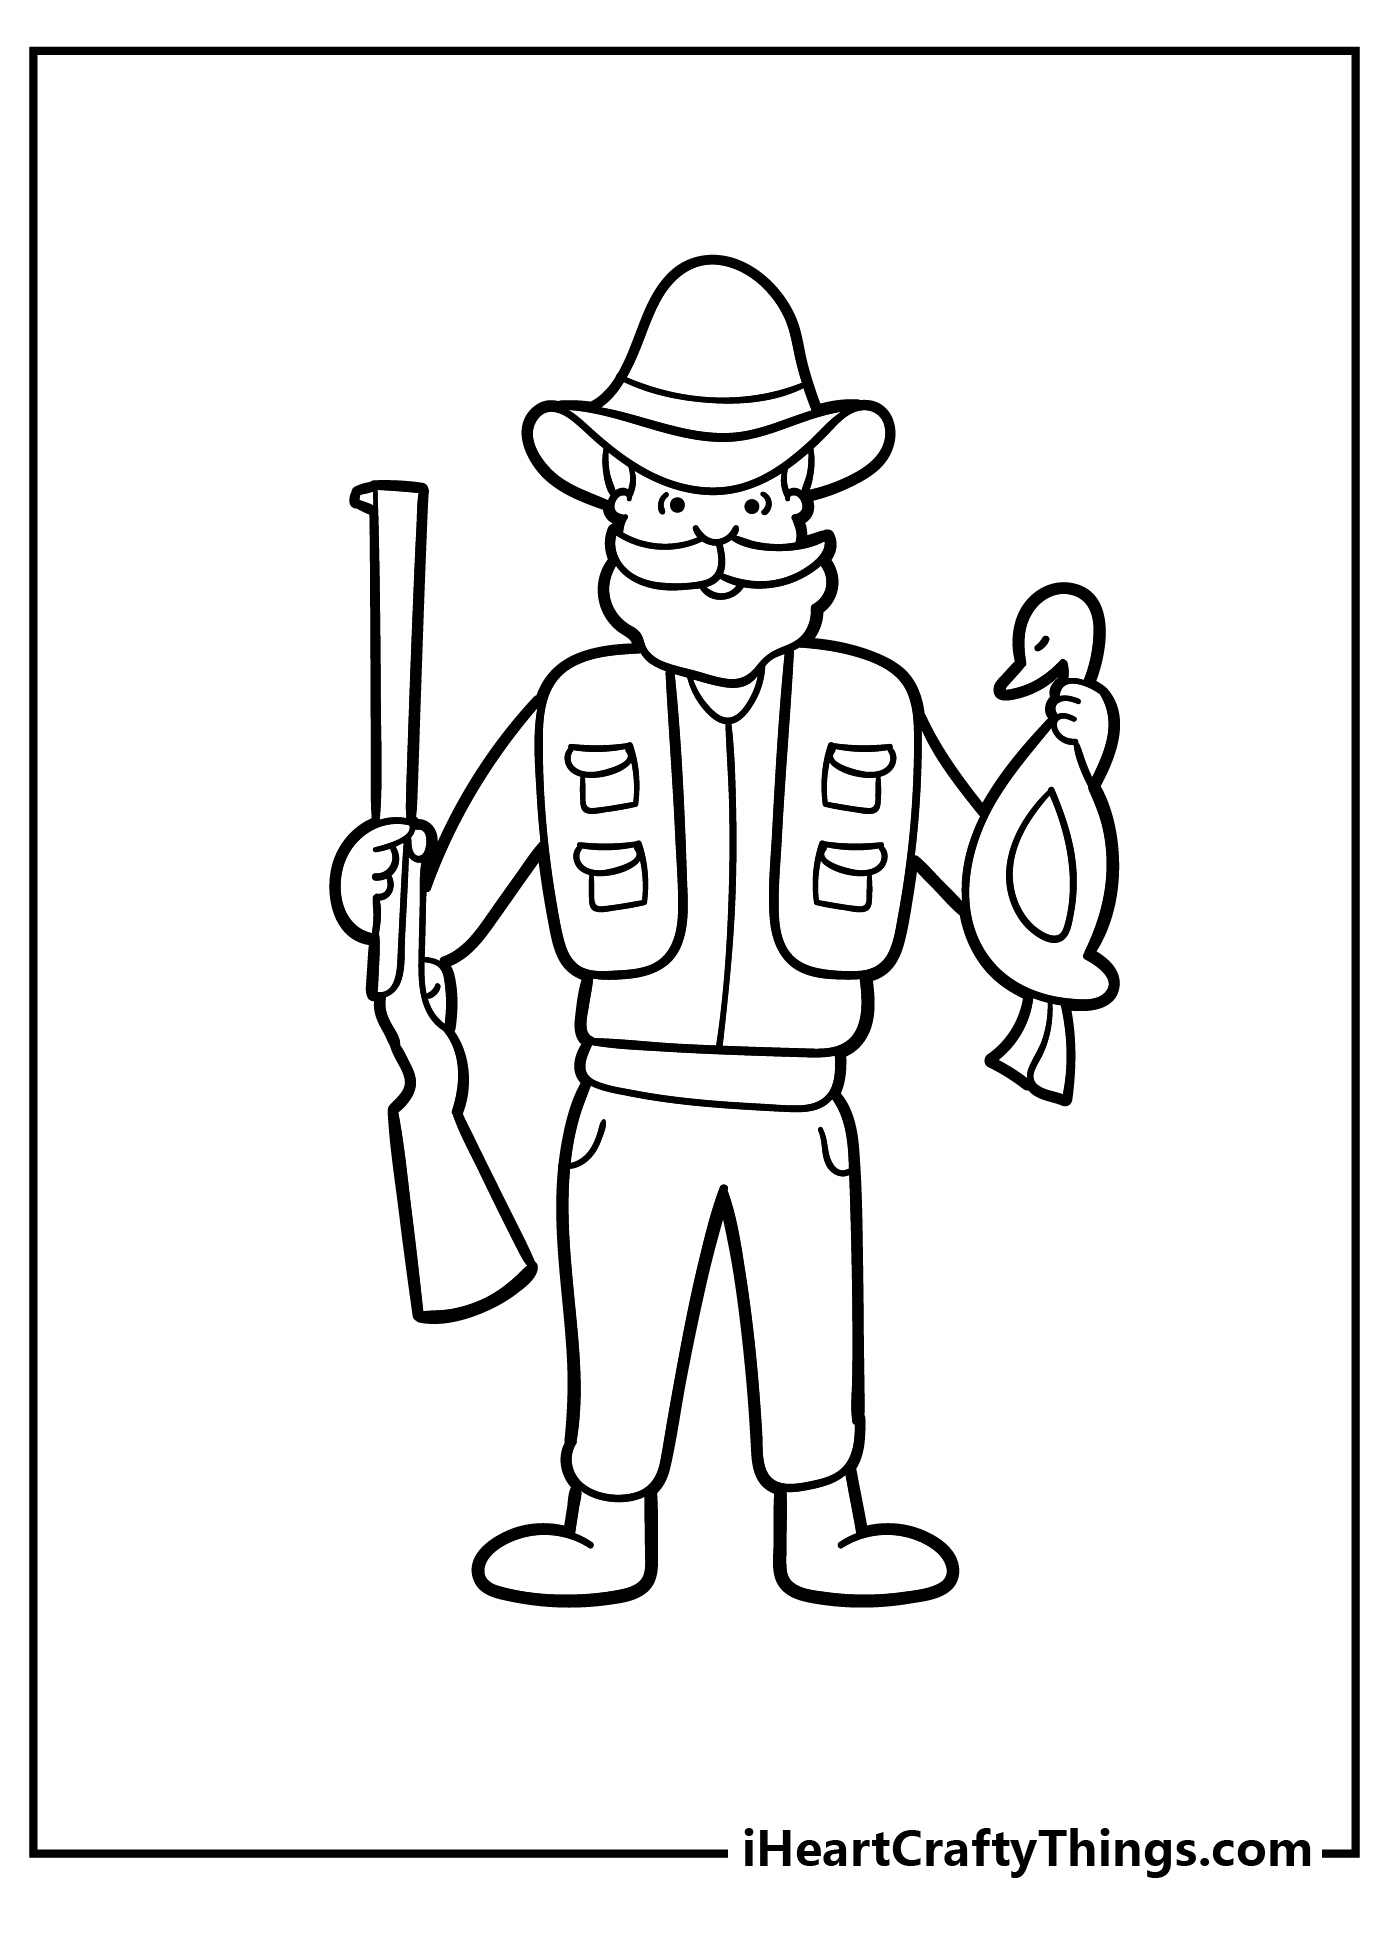 Hunting Coloring Sheet for children free download